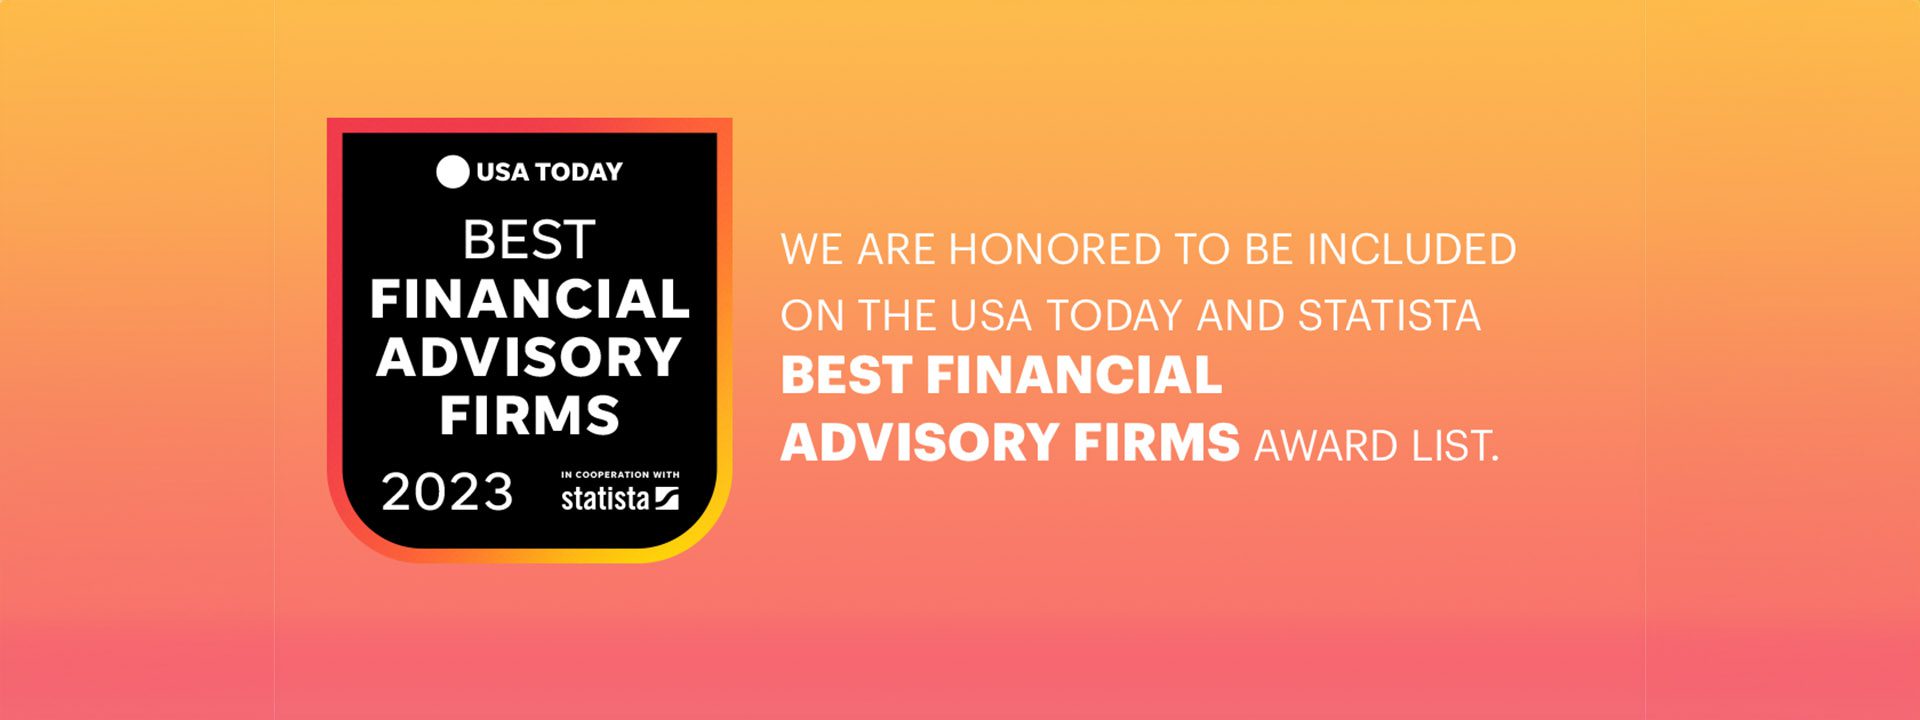 MarsJewett Financial Group is delighted to be named a Best Financial